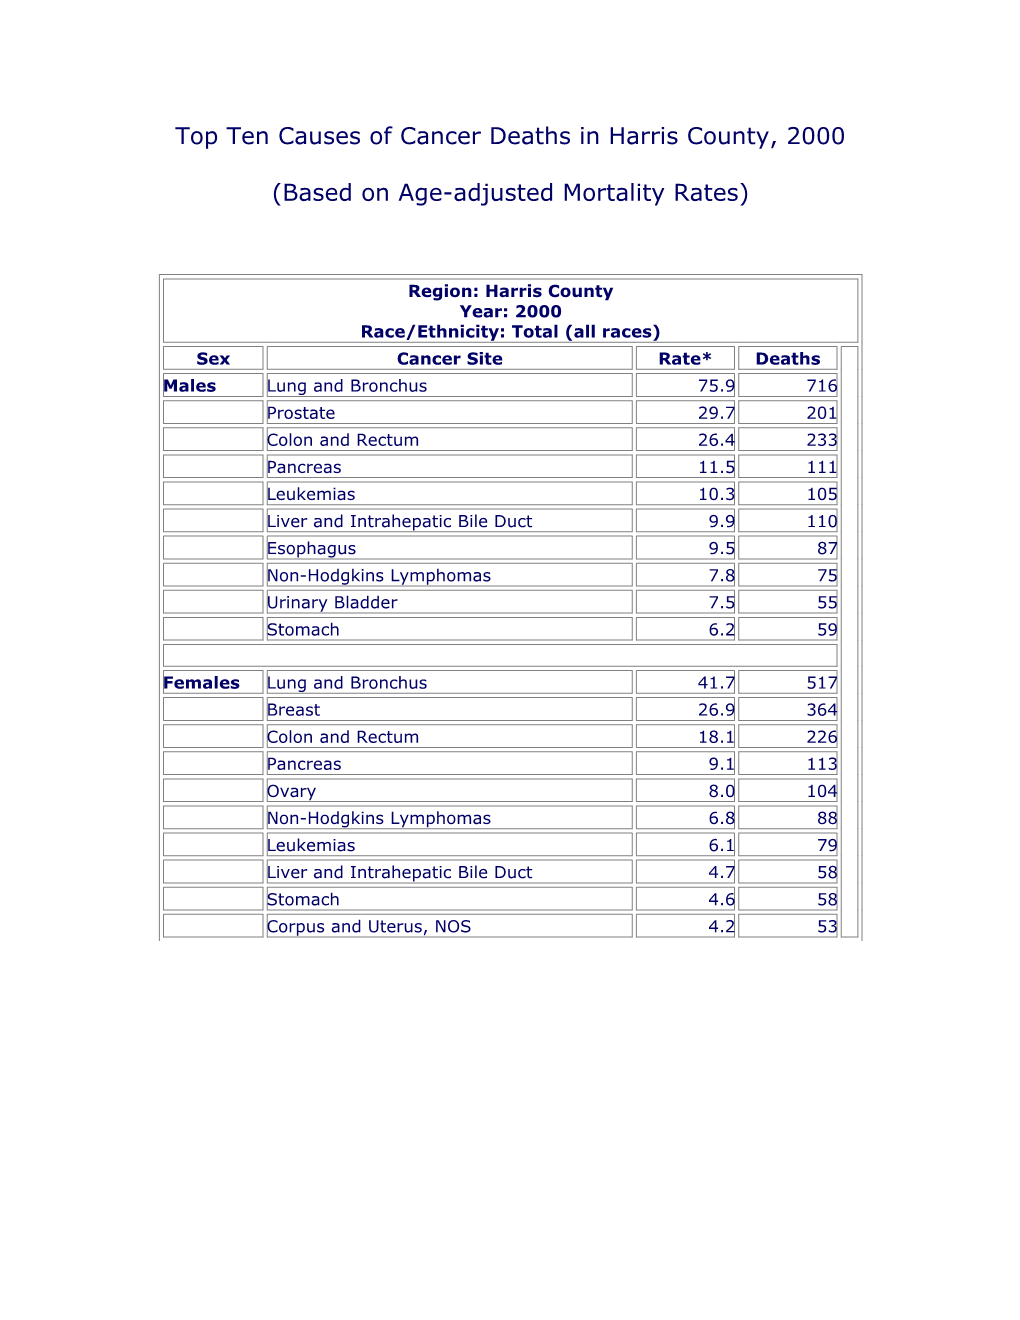 Top Ten Causes of Cancer Deaths in Harris County, 2000